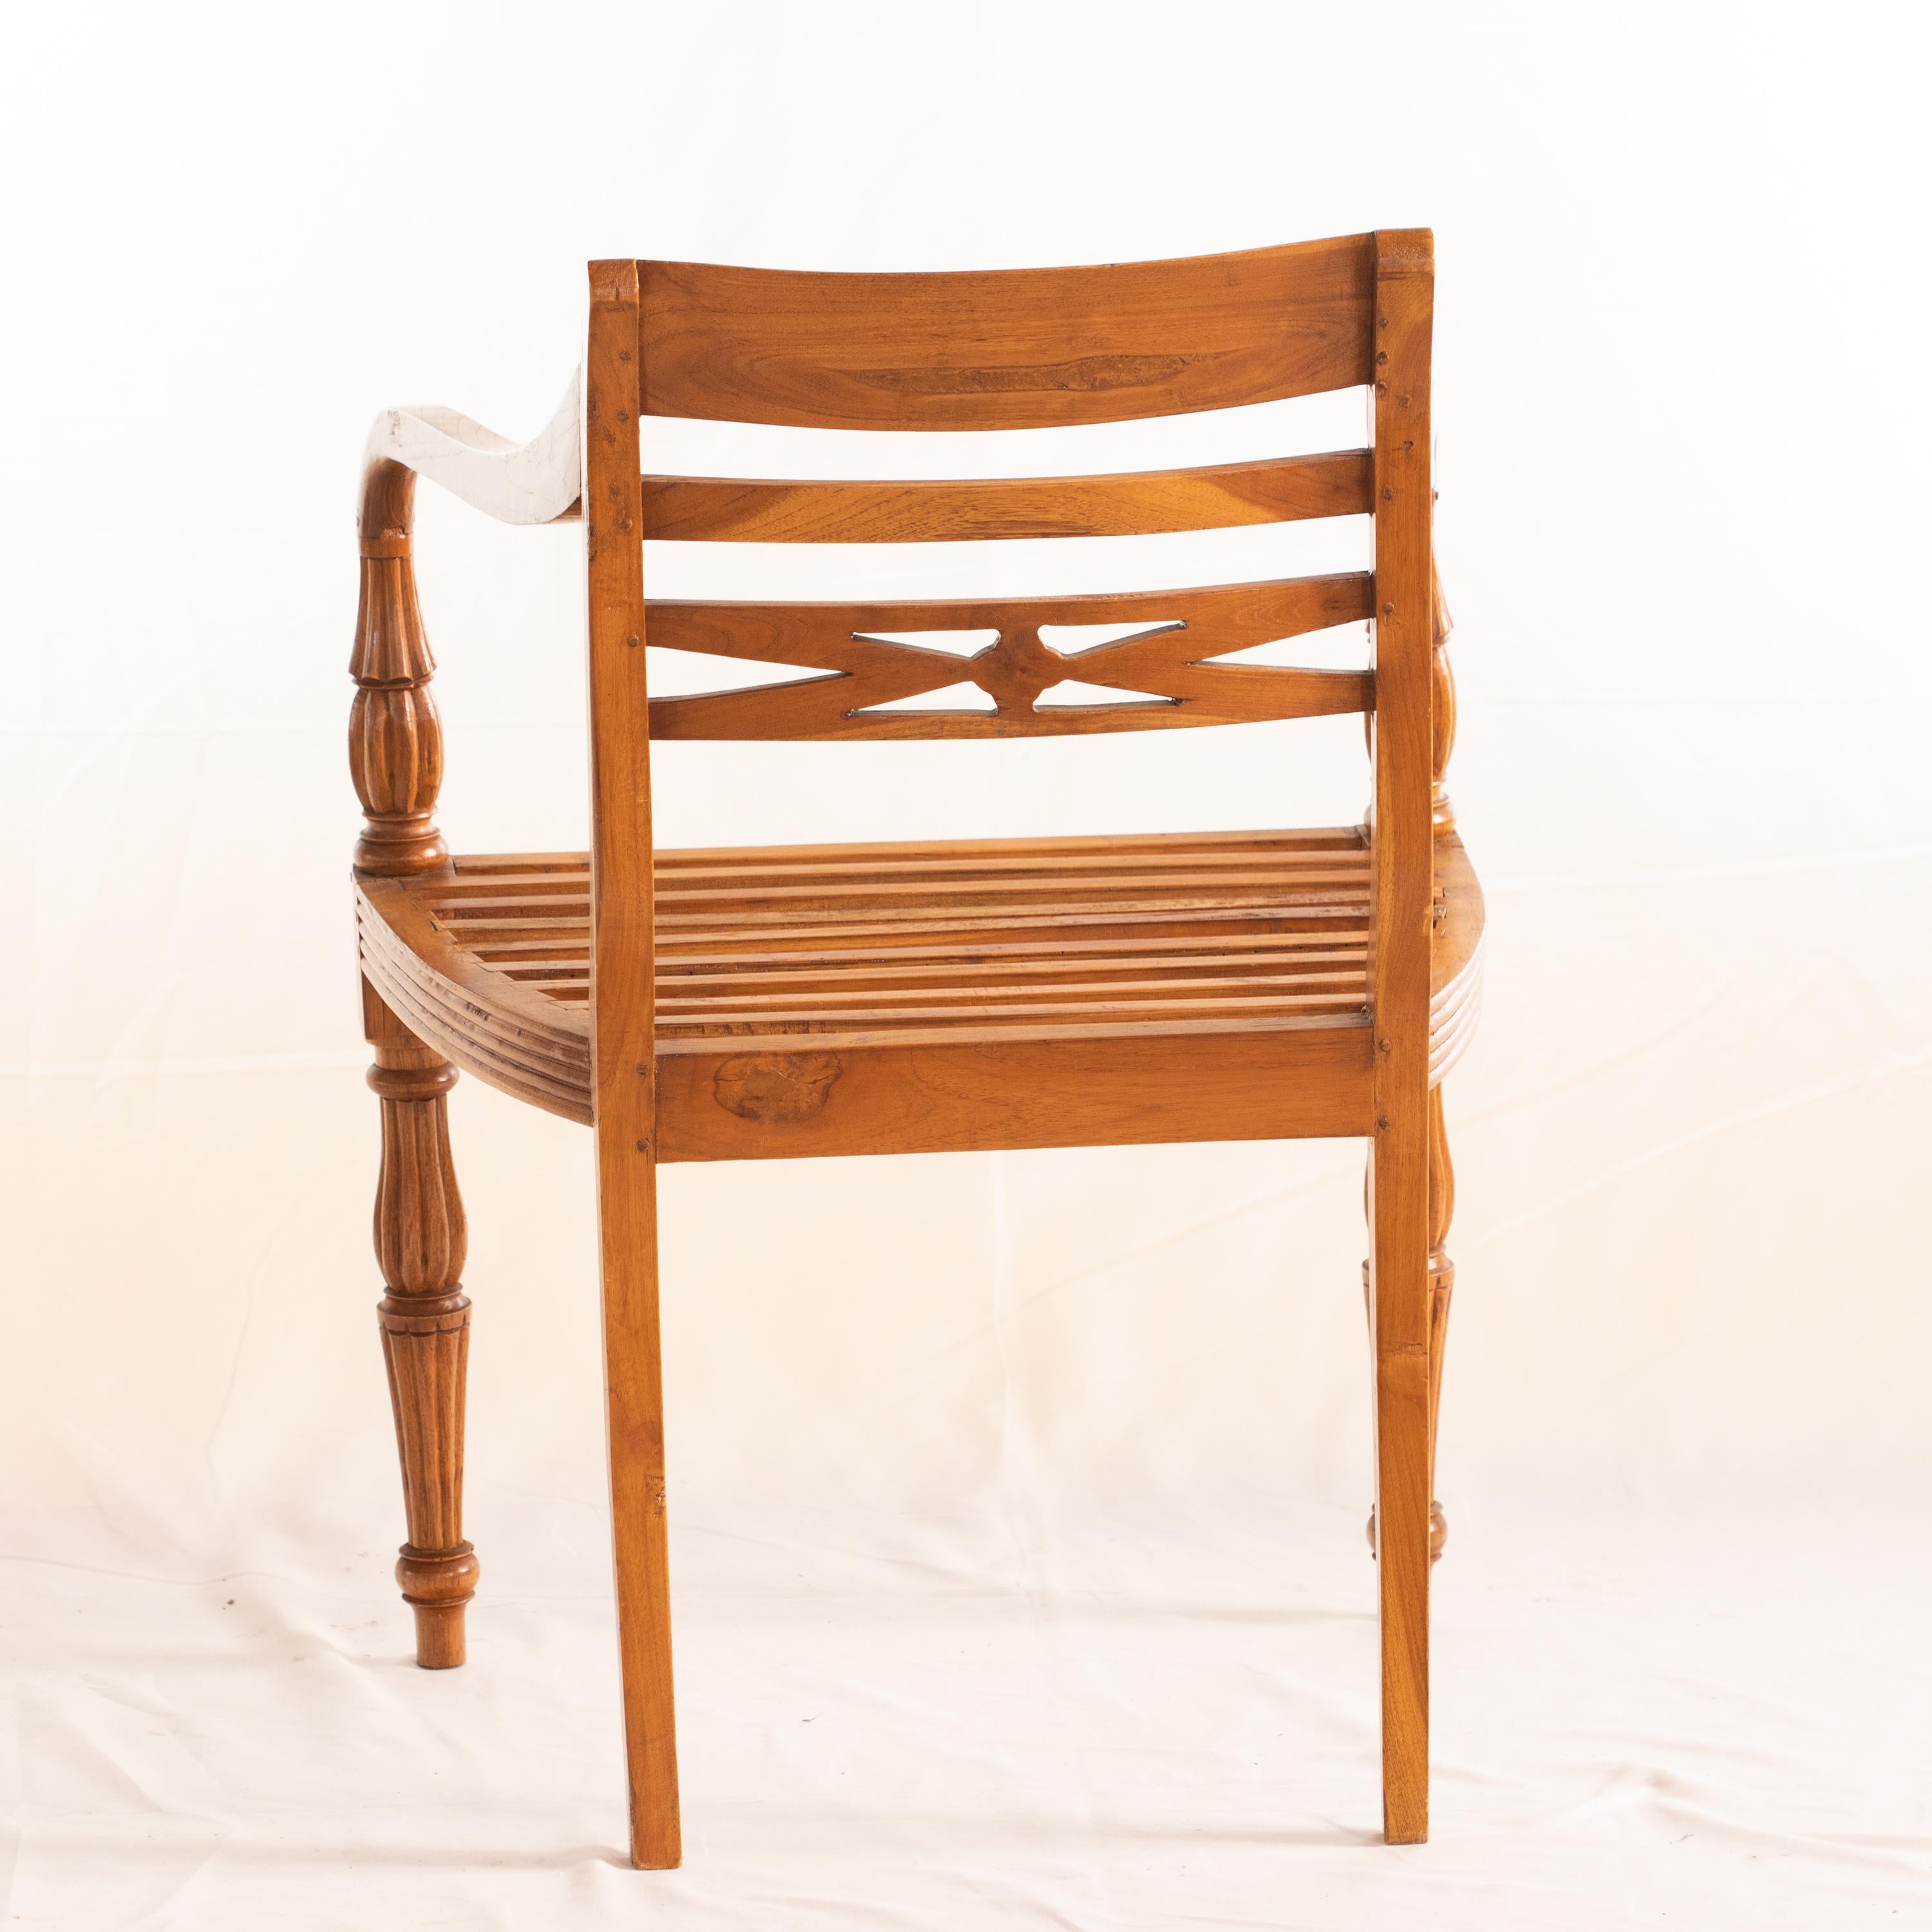 Hand-Carved Wood Chair Light Brown Minimalist Carved Vintage Italian Wood Chair Furniture